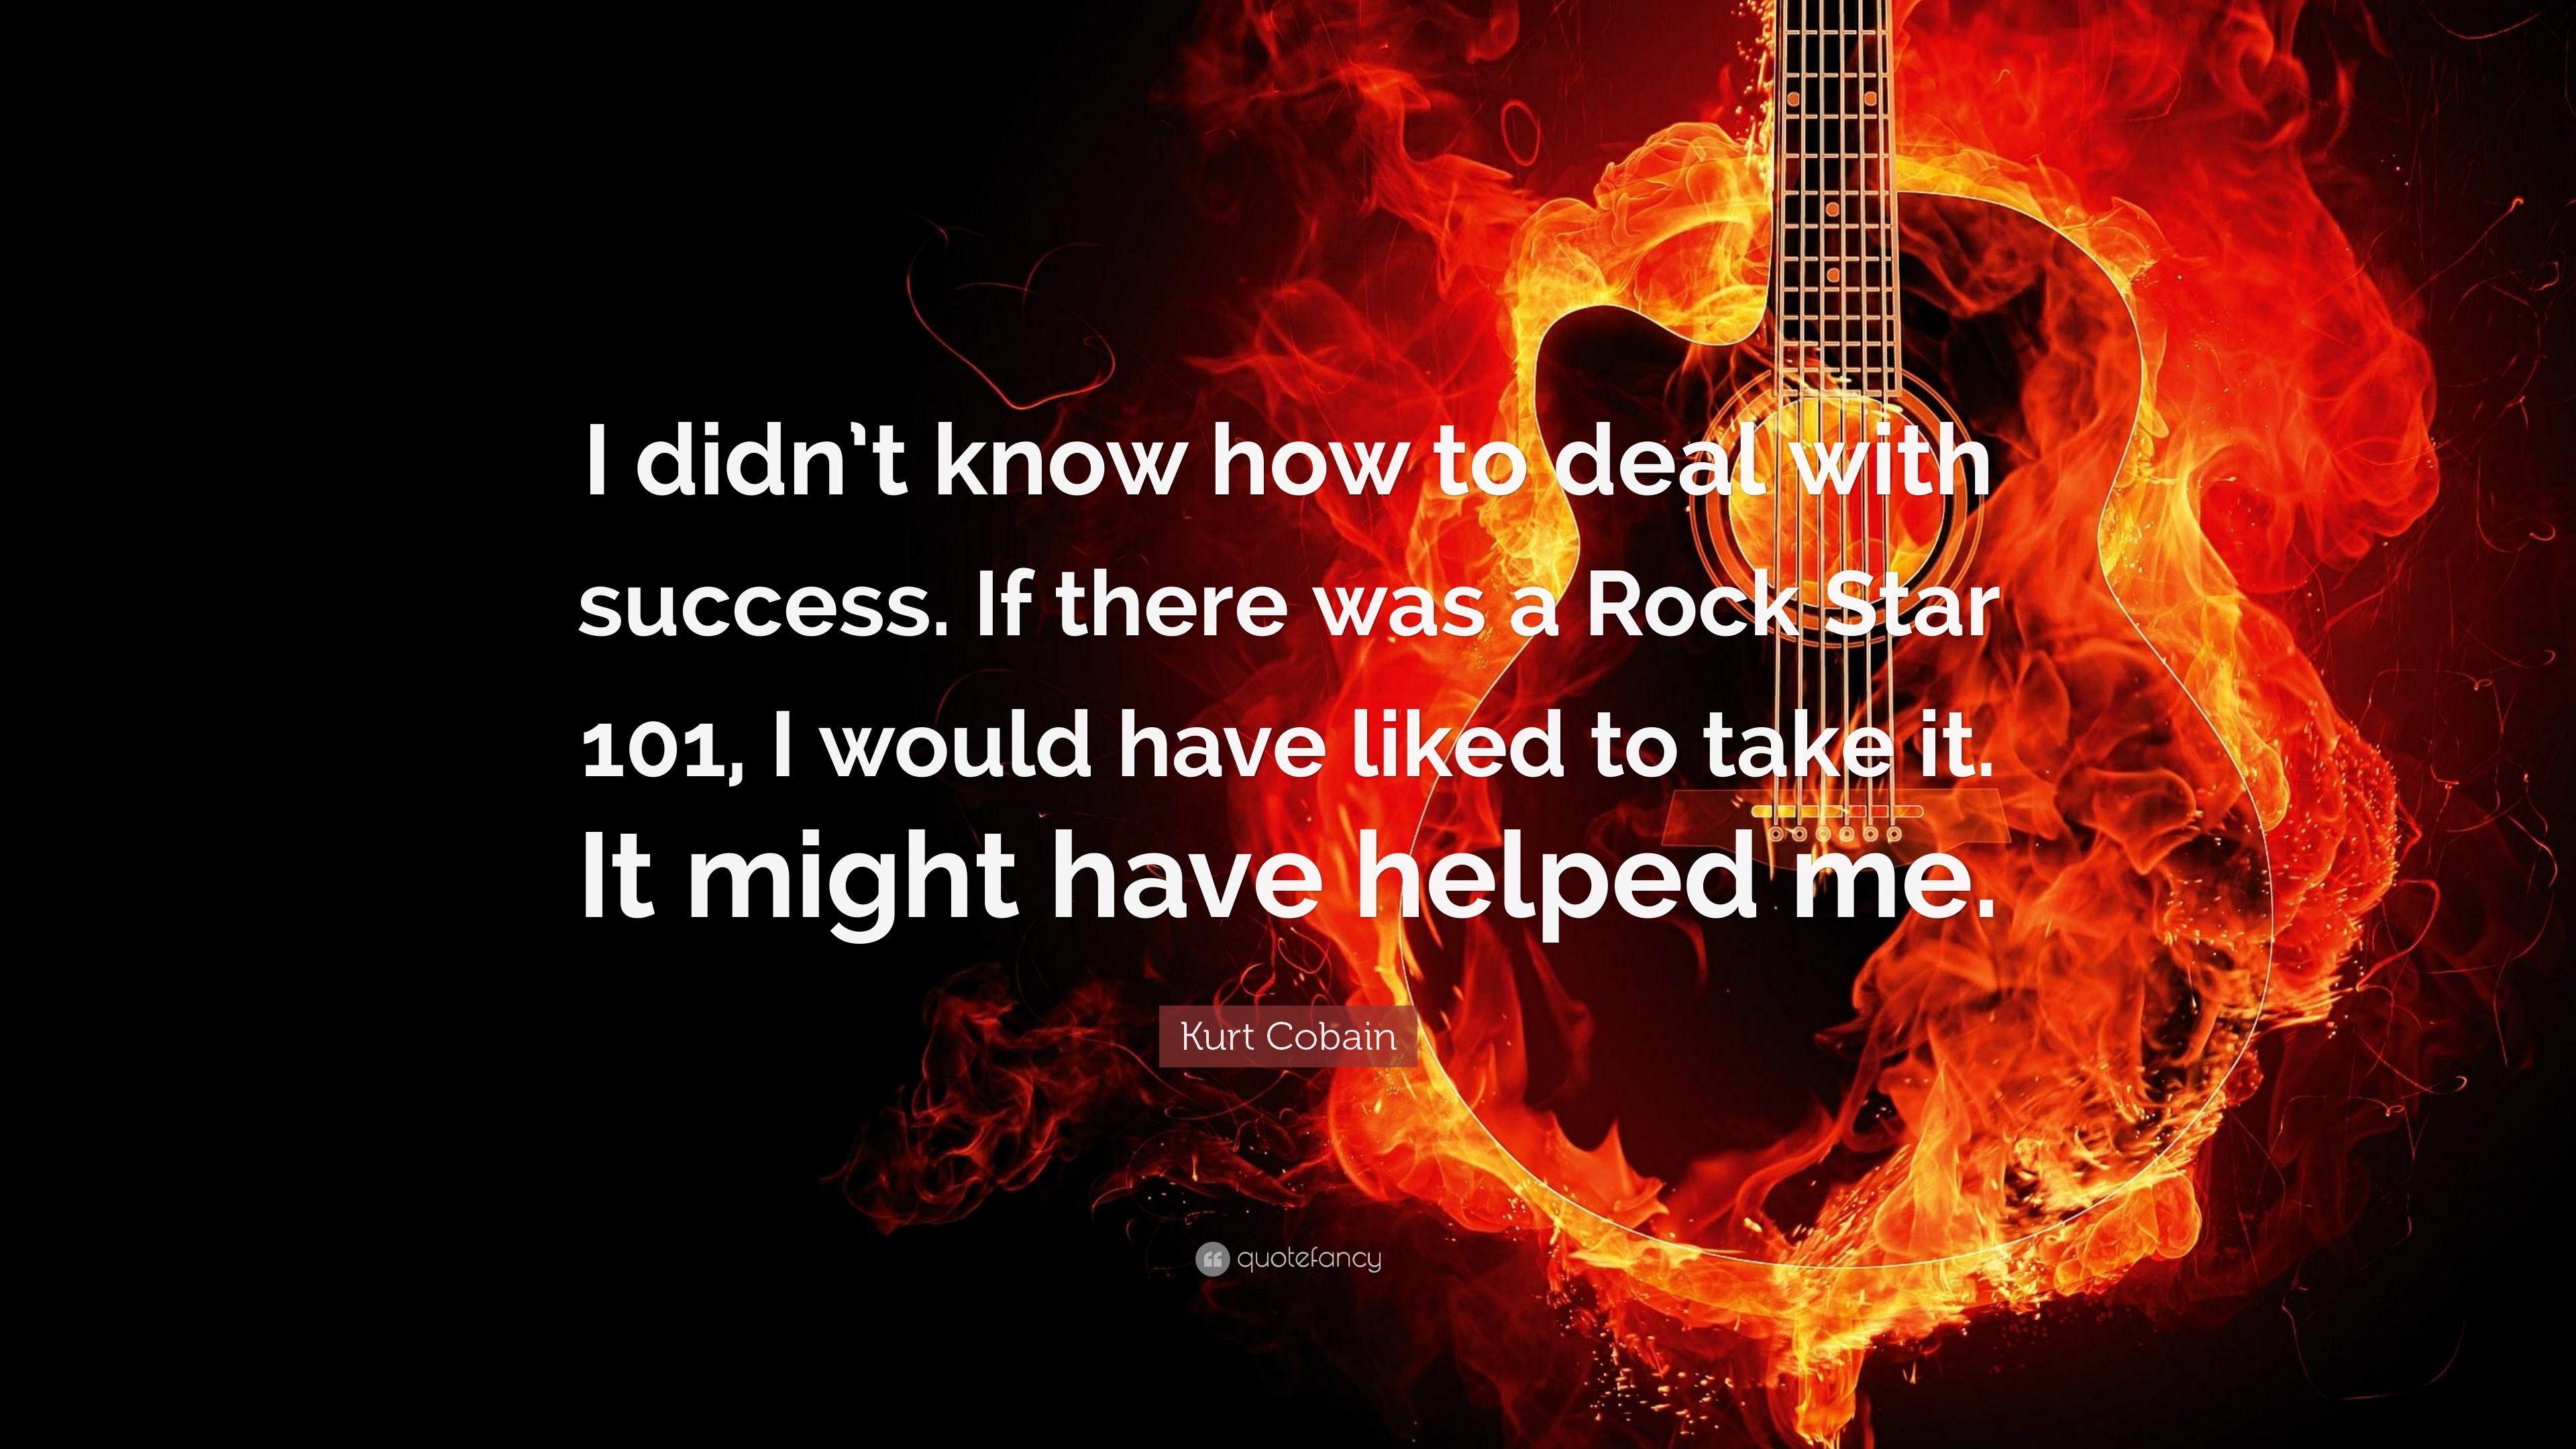 Kurt Cobain Quote: “I didn't know how to deal with success. If there